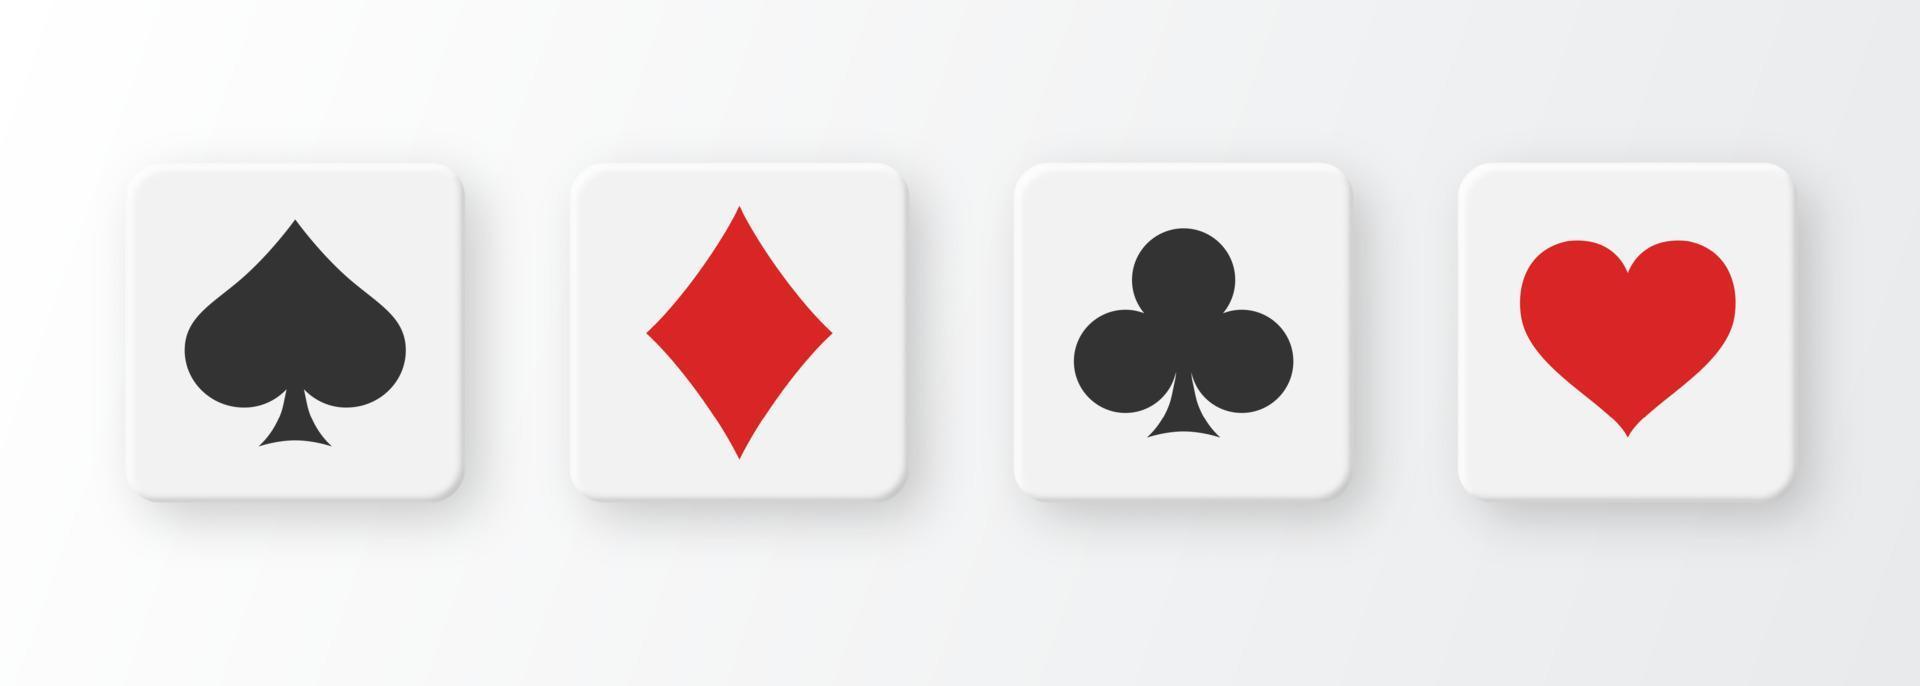 Poker and Casino buttons with suit deck of playing cards on white background. vector